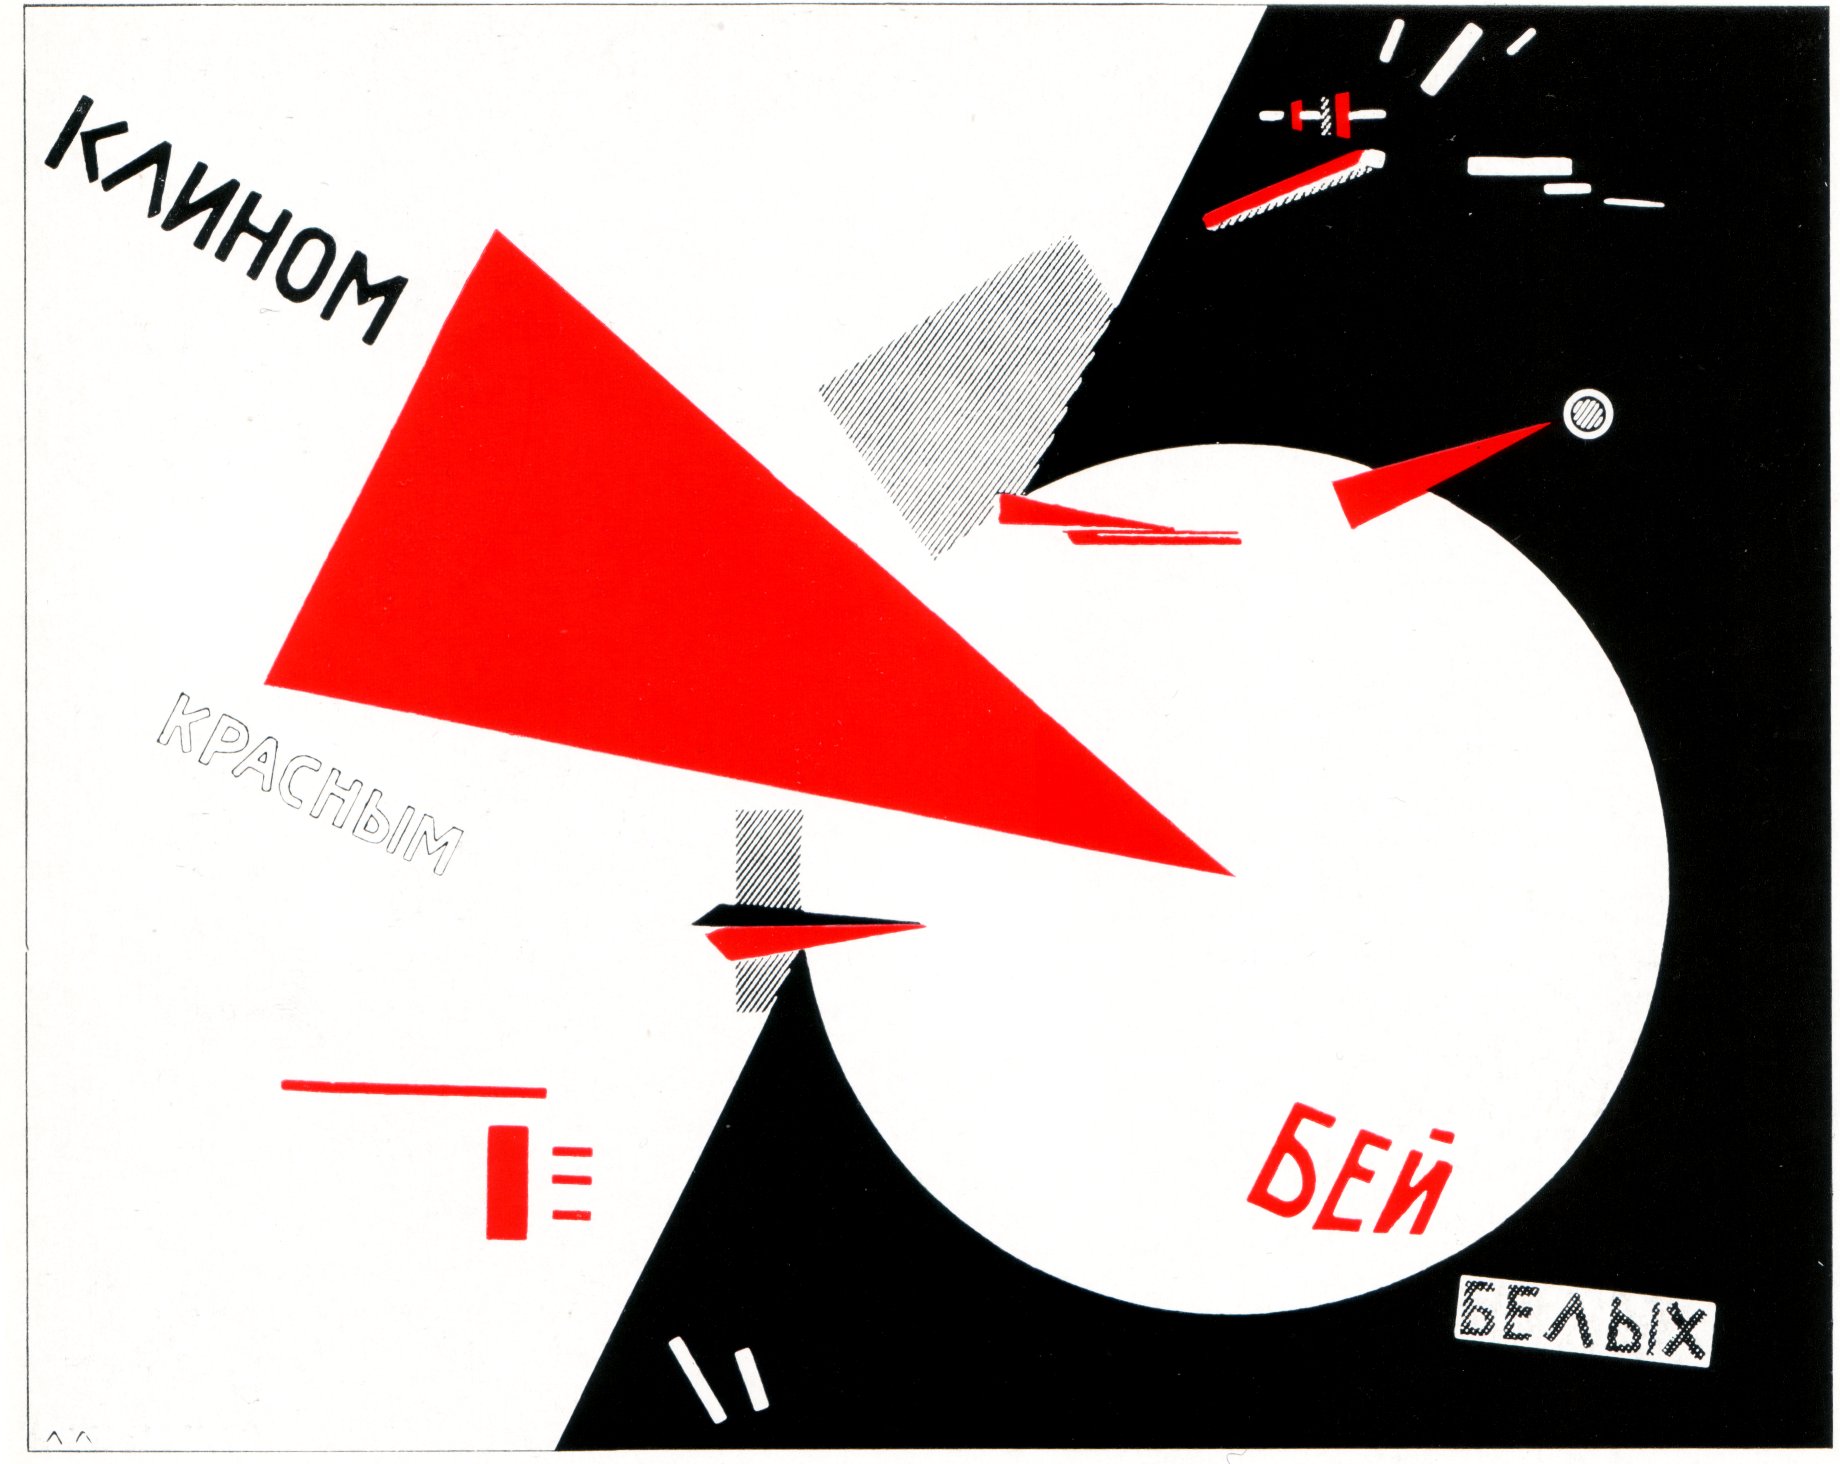 Beat the Whites with the Red Wedge by El Lissitzky - 1919 - 23 x 19 cm private collection